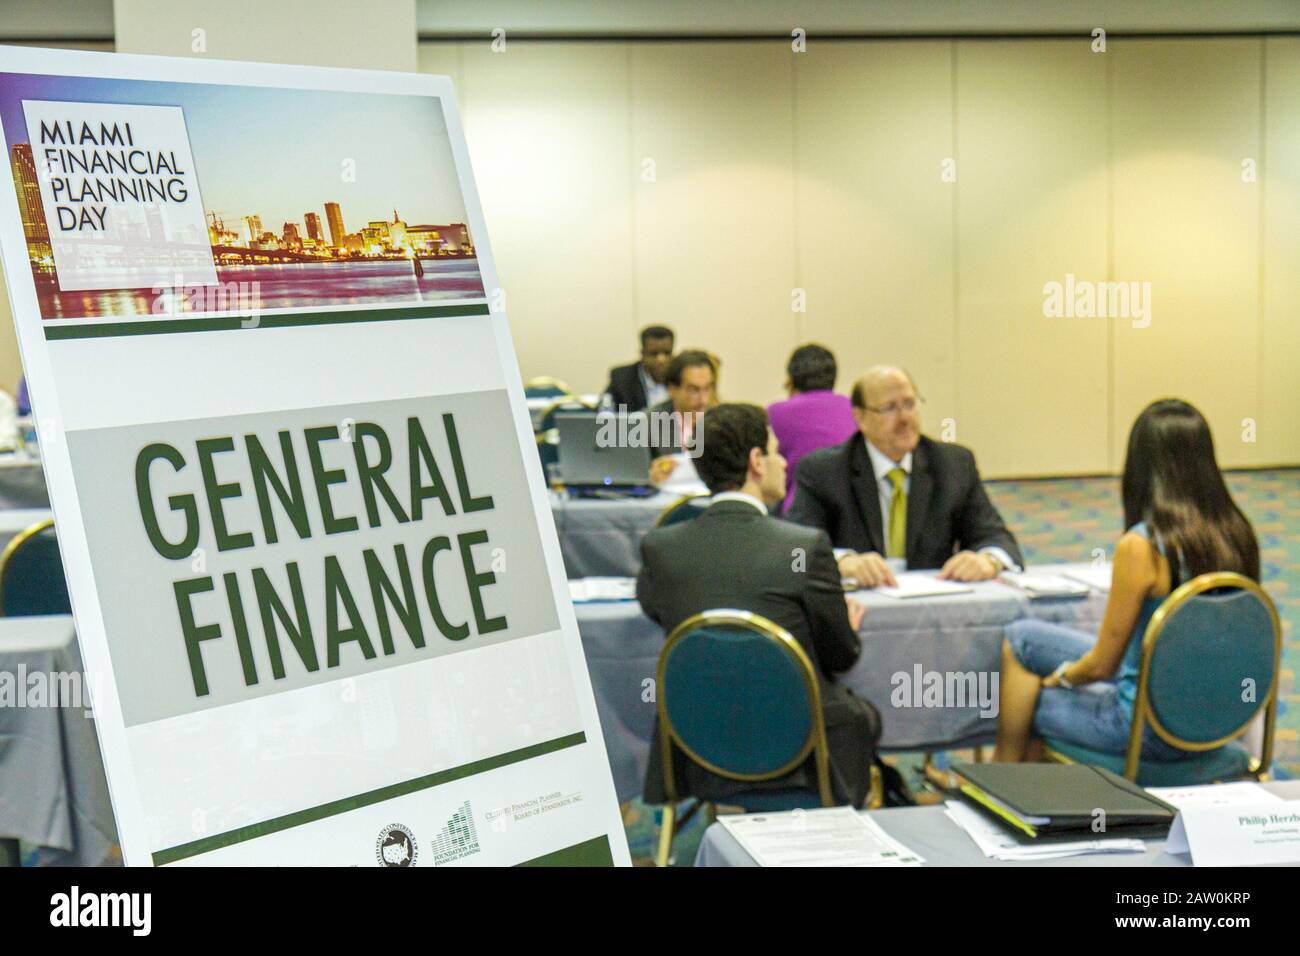 Miami Florida,James L. Knight Convention Center,Miami Financial Planning Day,free advice,guidanceal planners,sign,logo,general finance,visitors travel Stock Photo